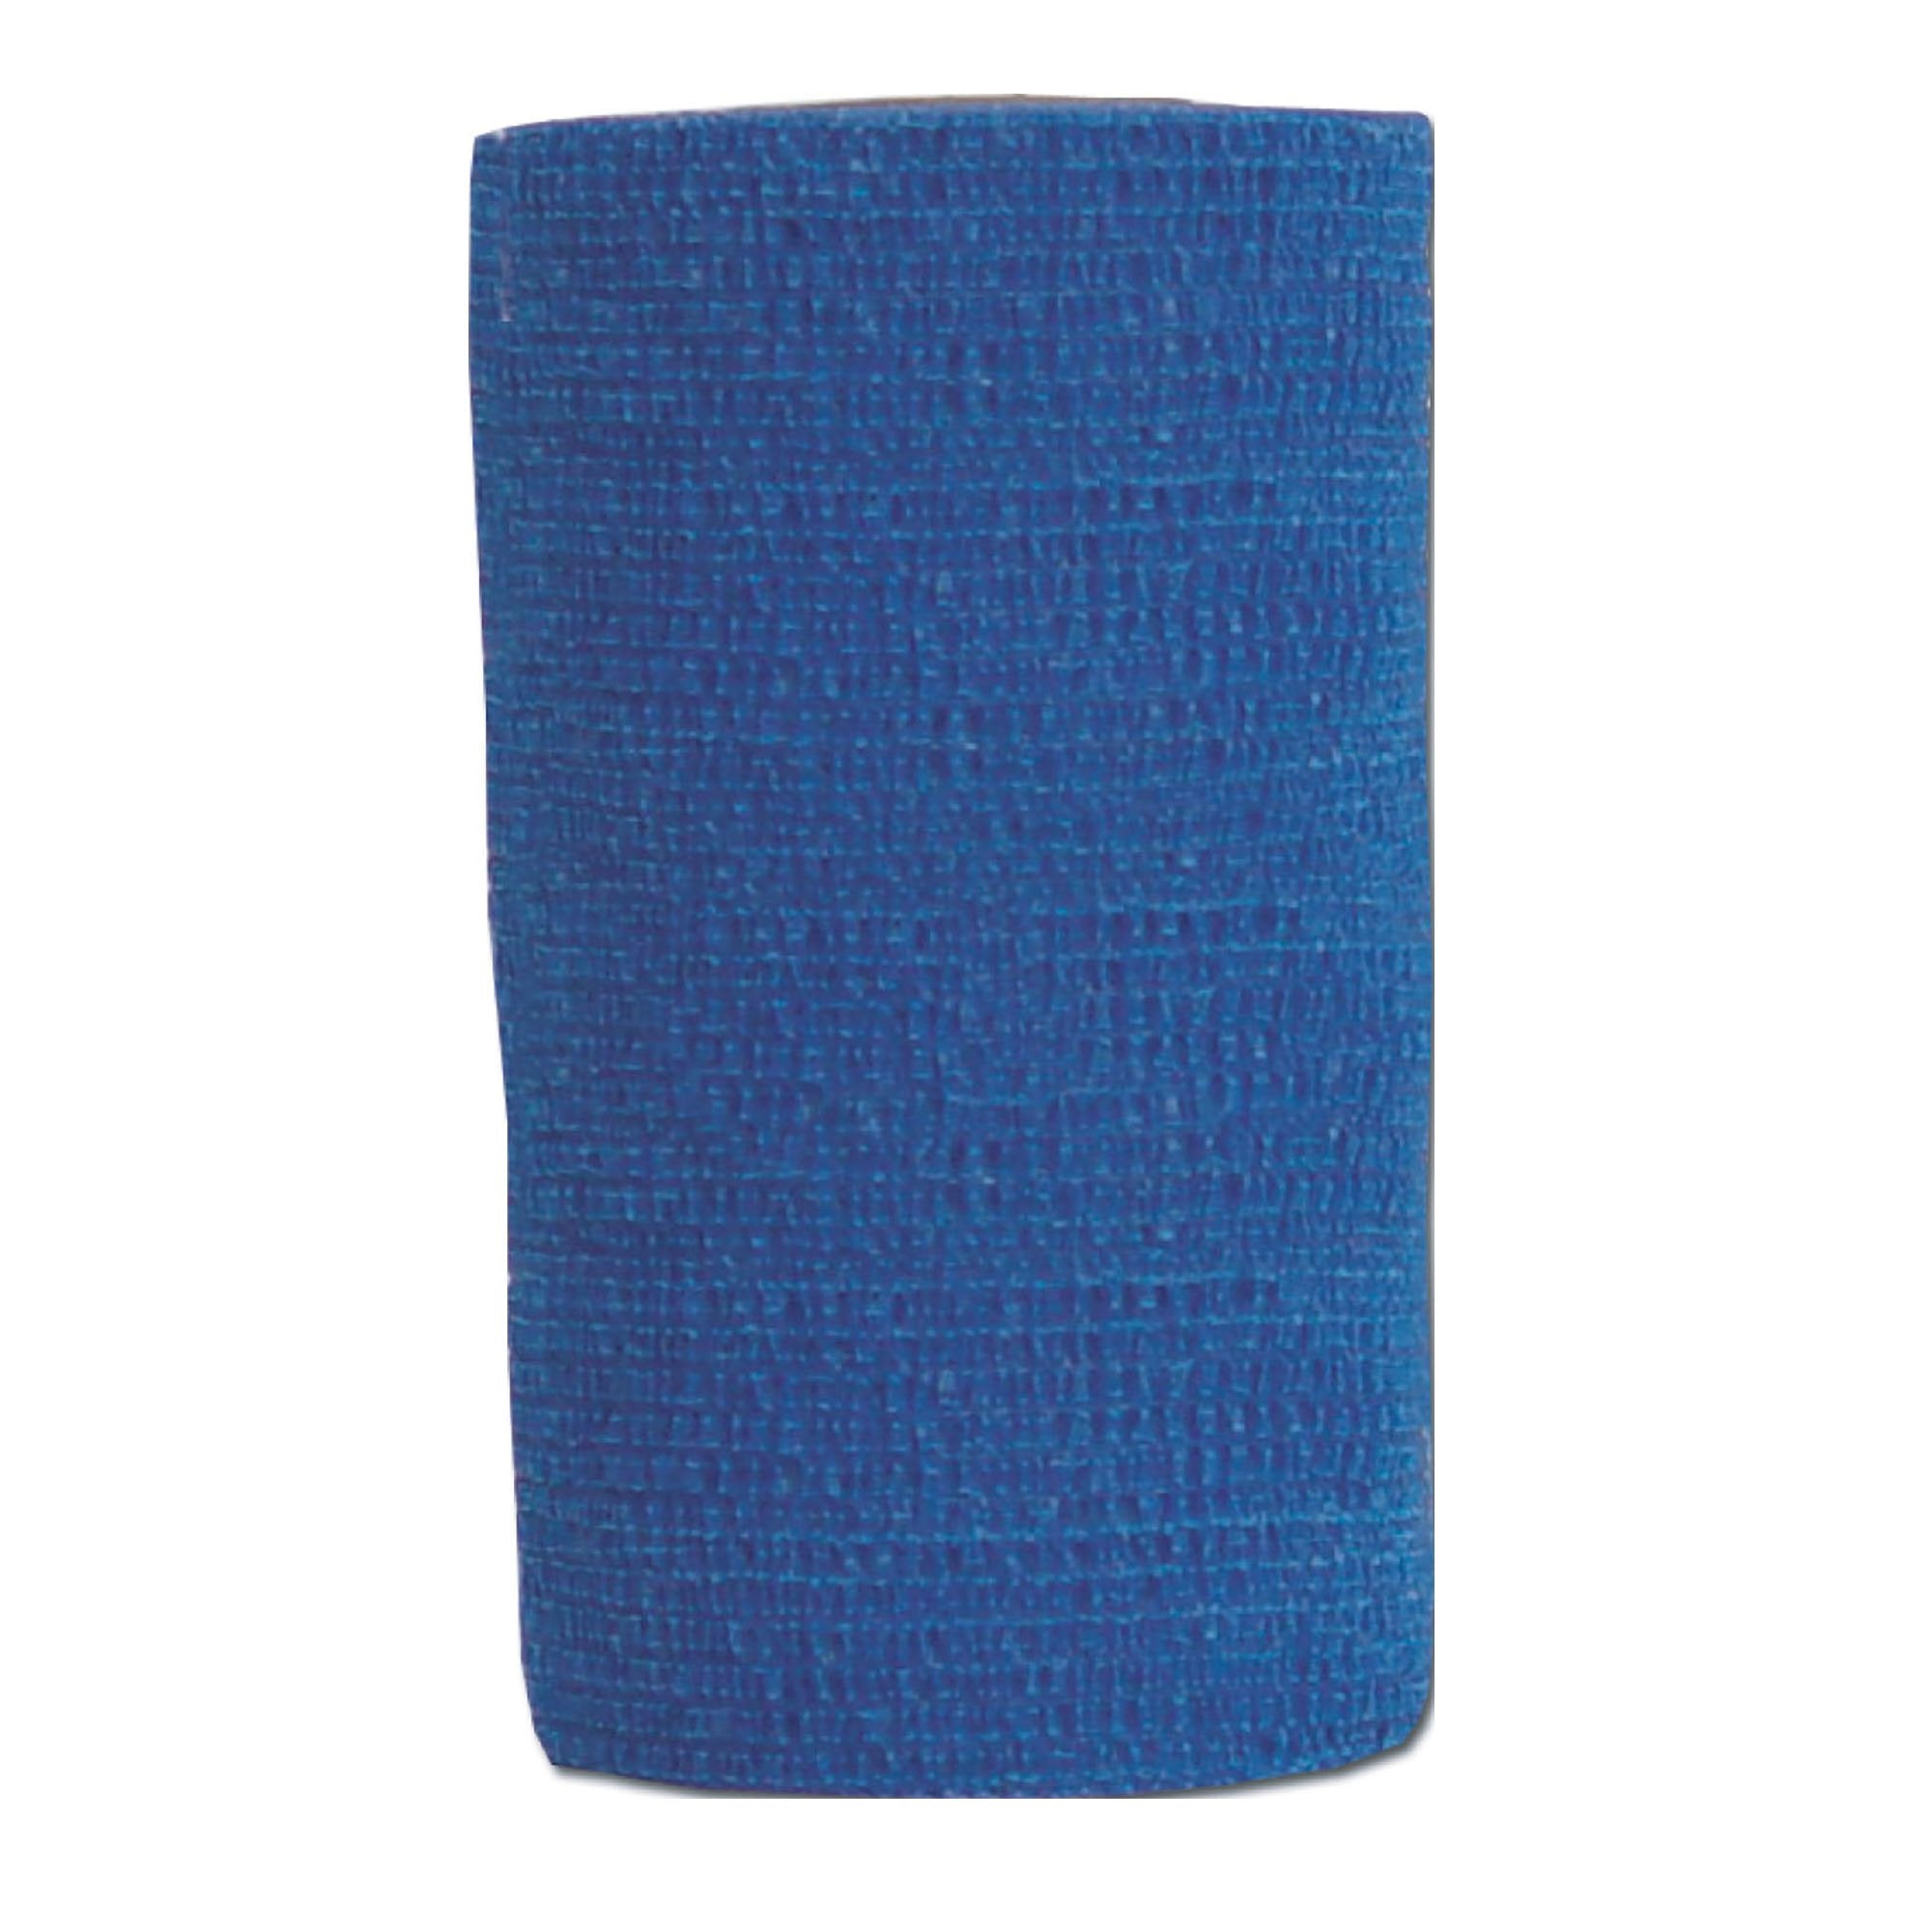 Cohesive Bandage Co-Flex®·Med 3 Inch X 5 Yard Self-Adherent Closure Blue NonSterile 16 lbs. Tensile Strength